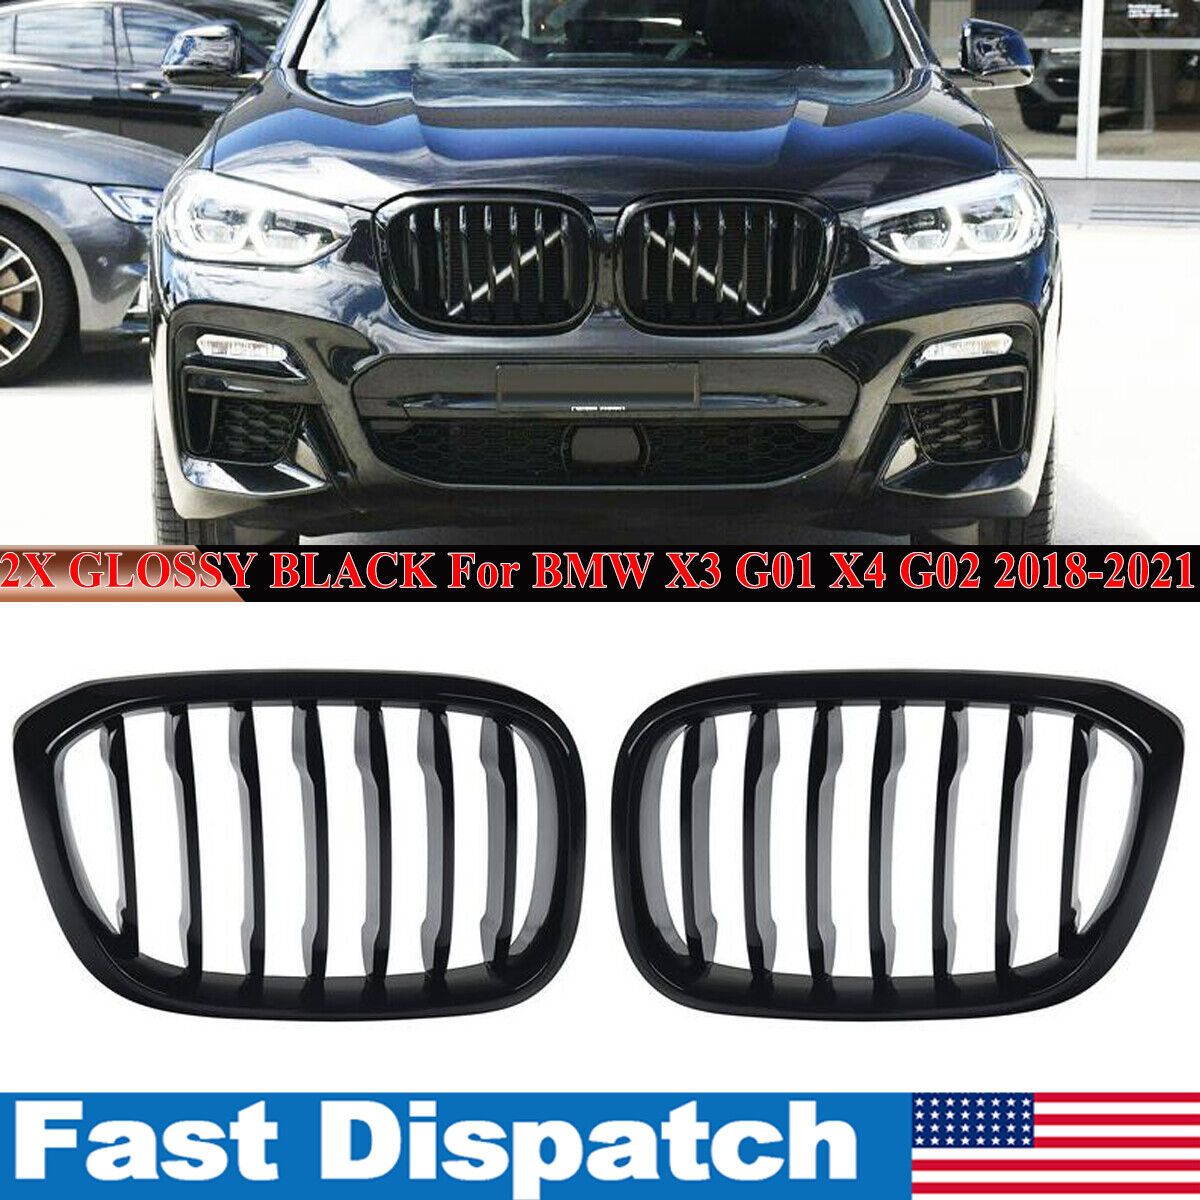 For BMW G01 X3 X3M G02 X4 2018 2019 2020 Glossy Black Front Hood Kidney Grille